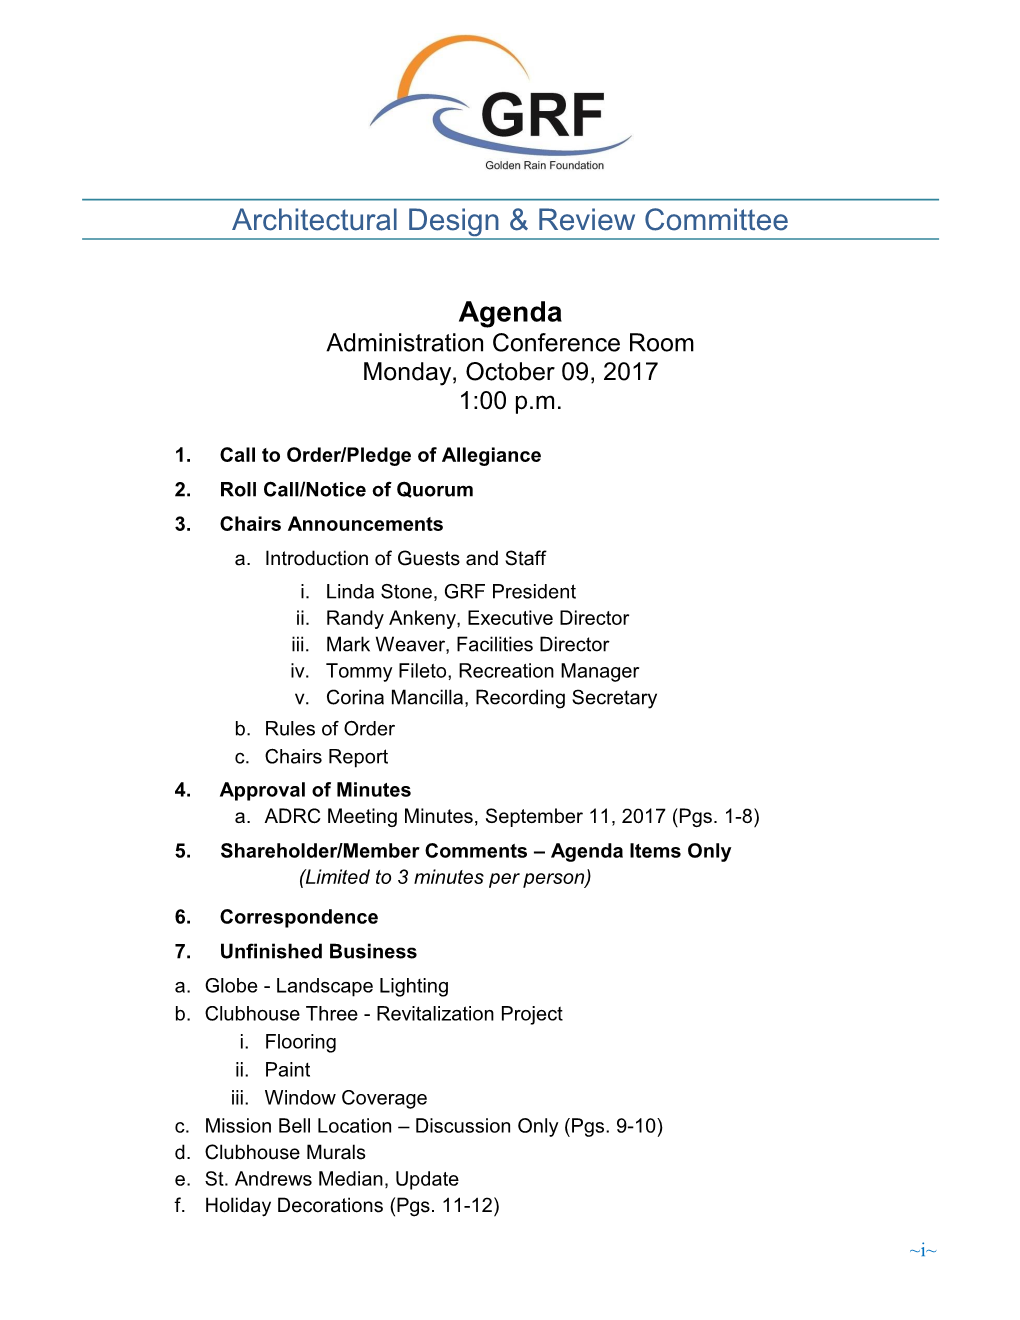 Architectural Design & Review Committee